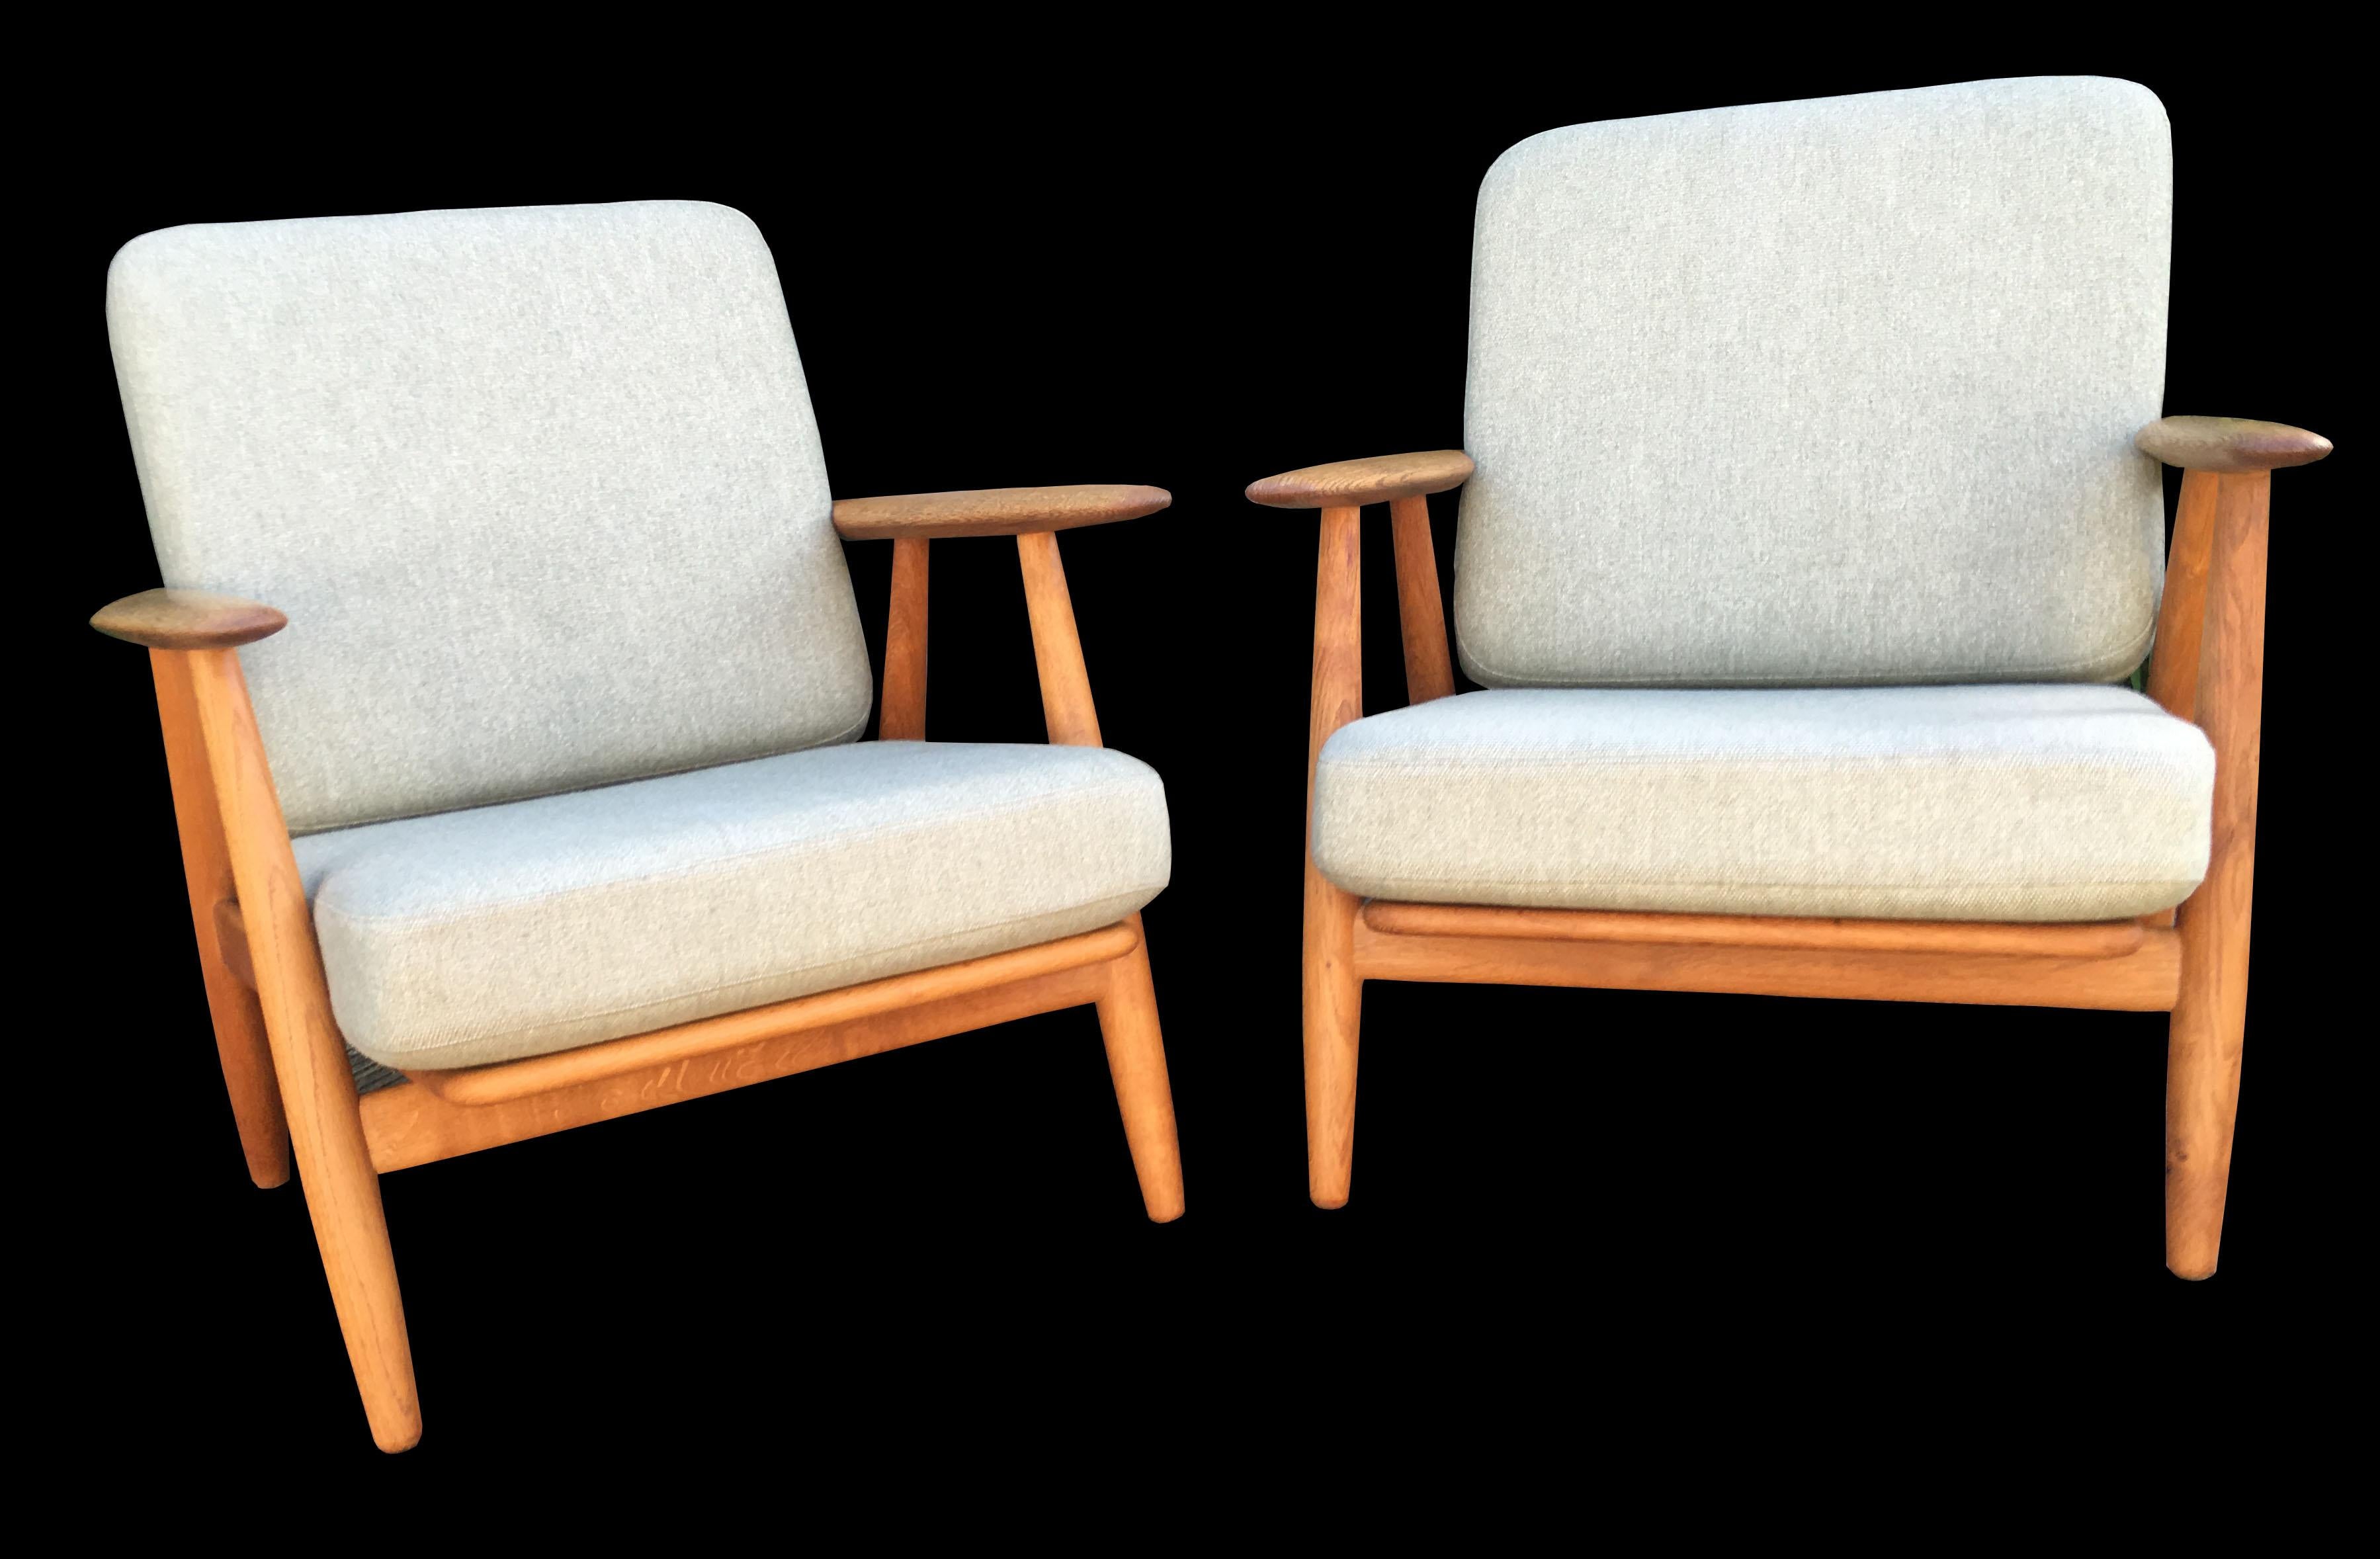 A very nice early original chairs by Hans Wegner for GETAMA in very good condition, a nice patina on the frames. Legs and arms, and with fresh new cushion covers in mint green wool.